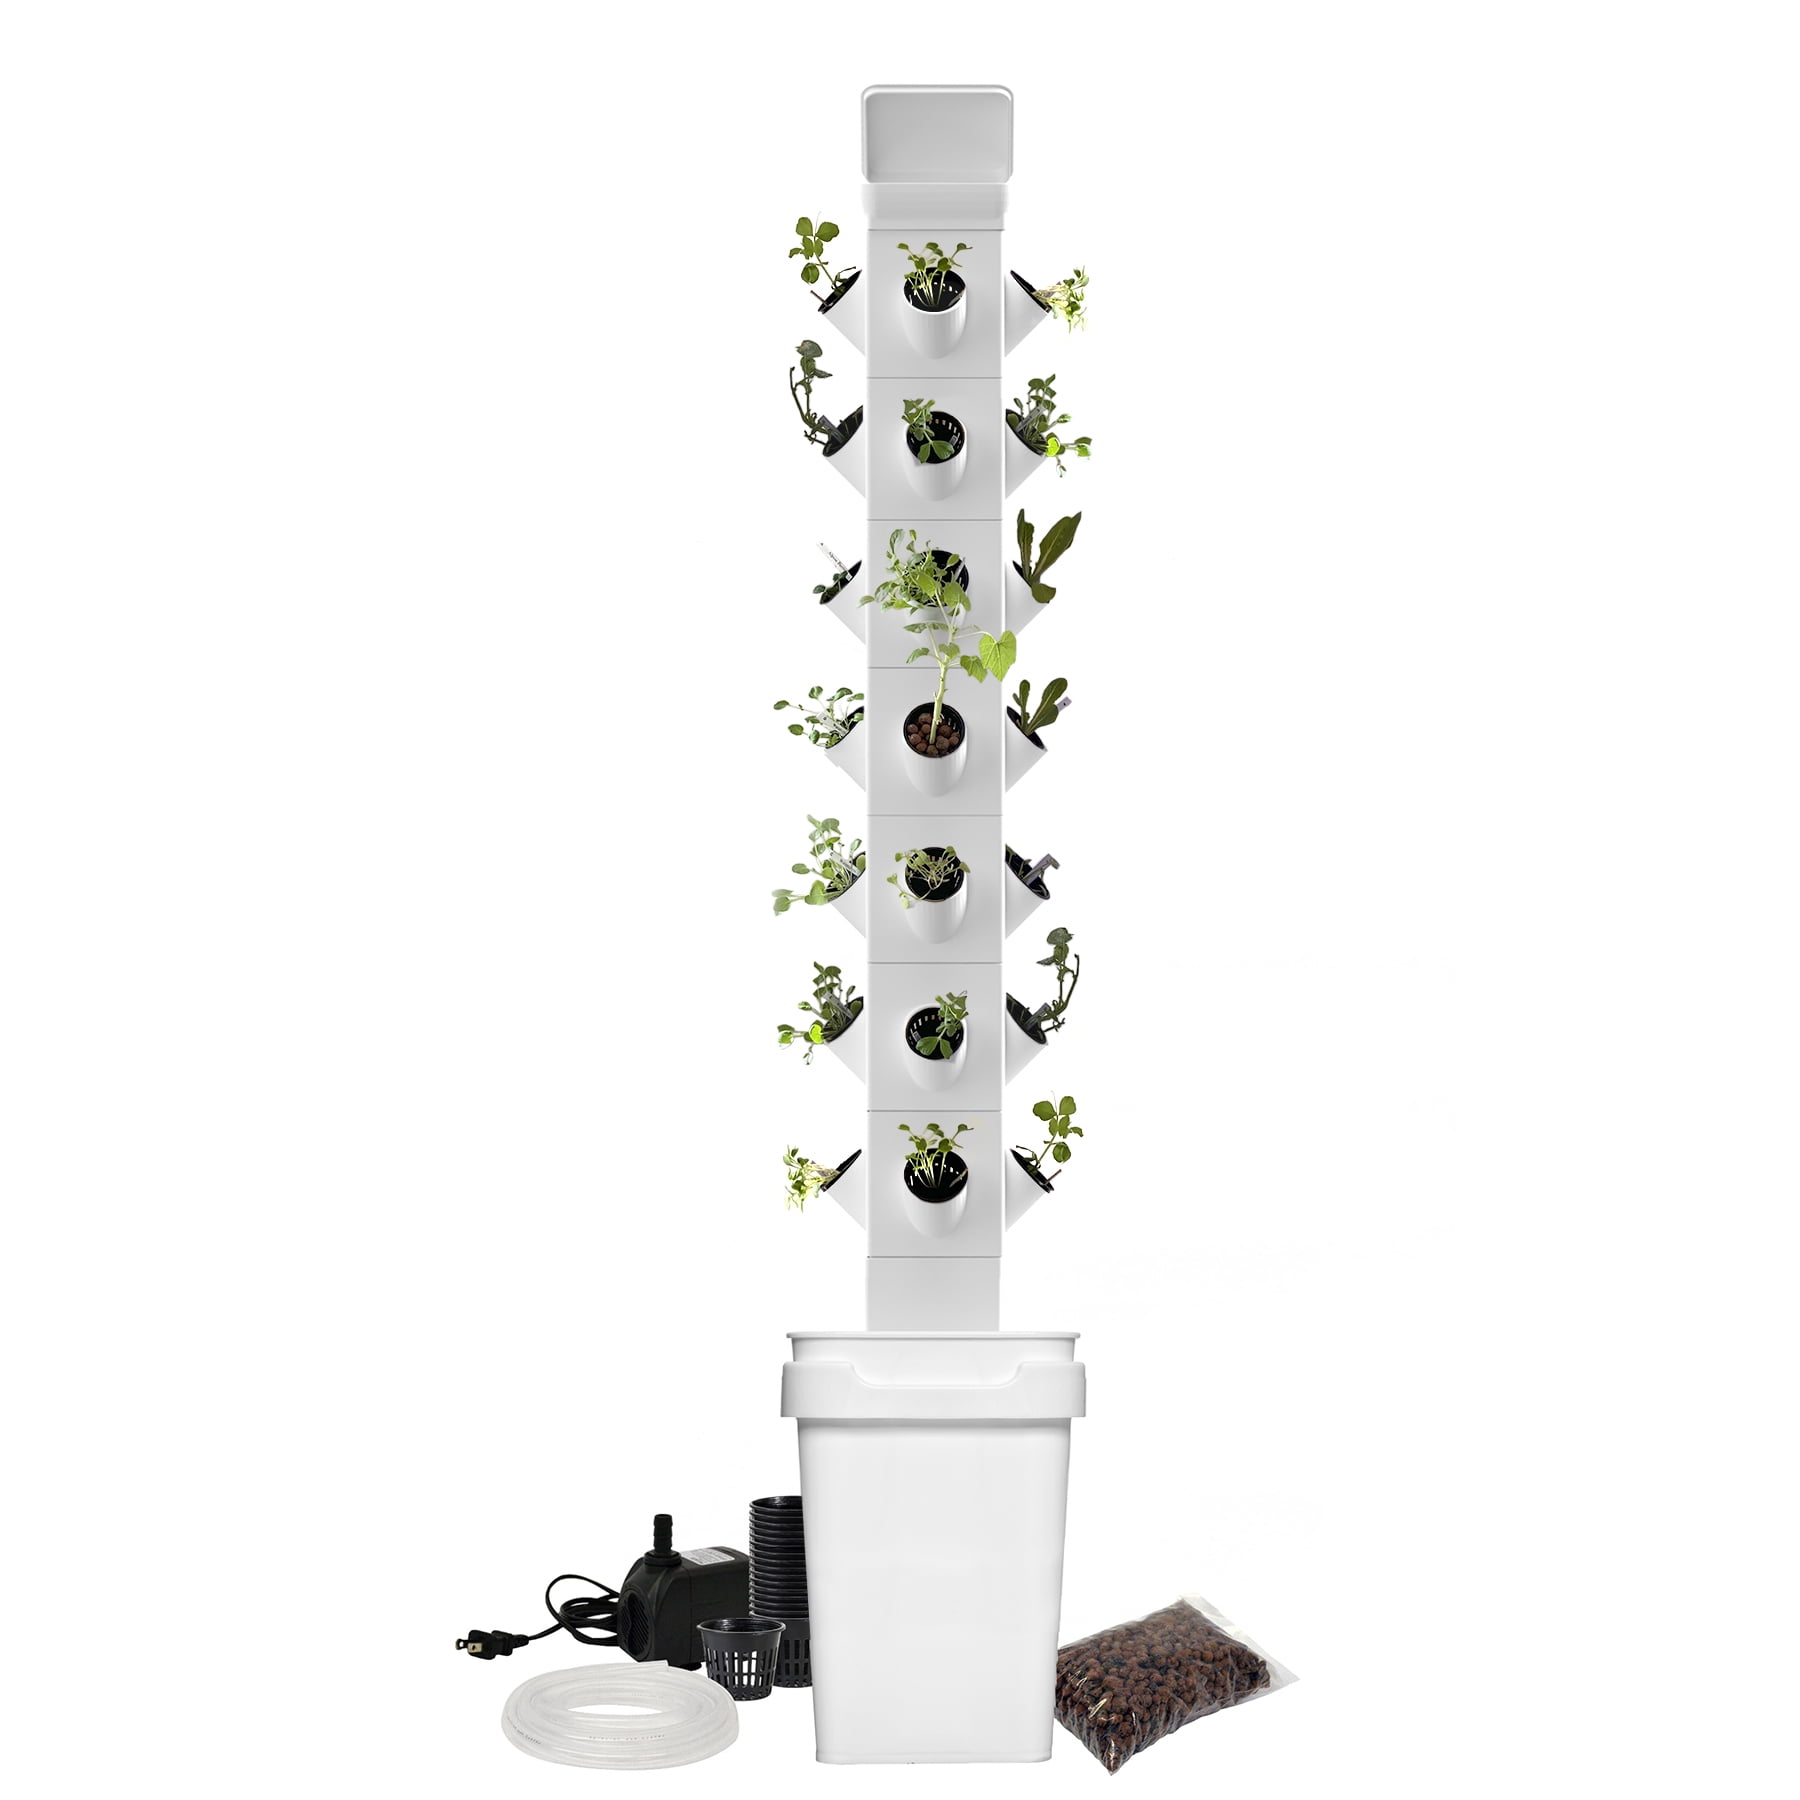 40Pcs DIY Hydroponic Pots for Vertical Tower Growing System Soilless Device Set 